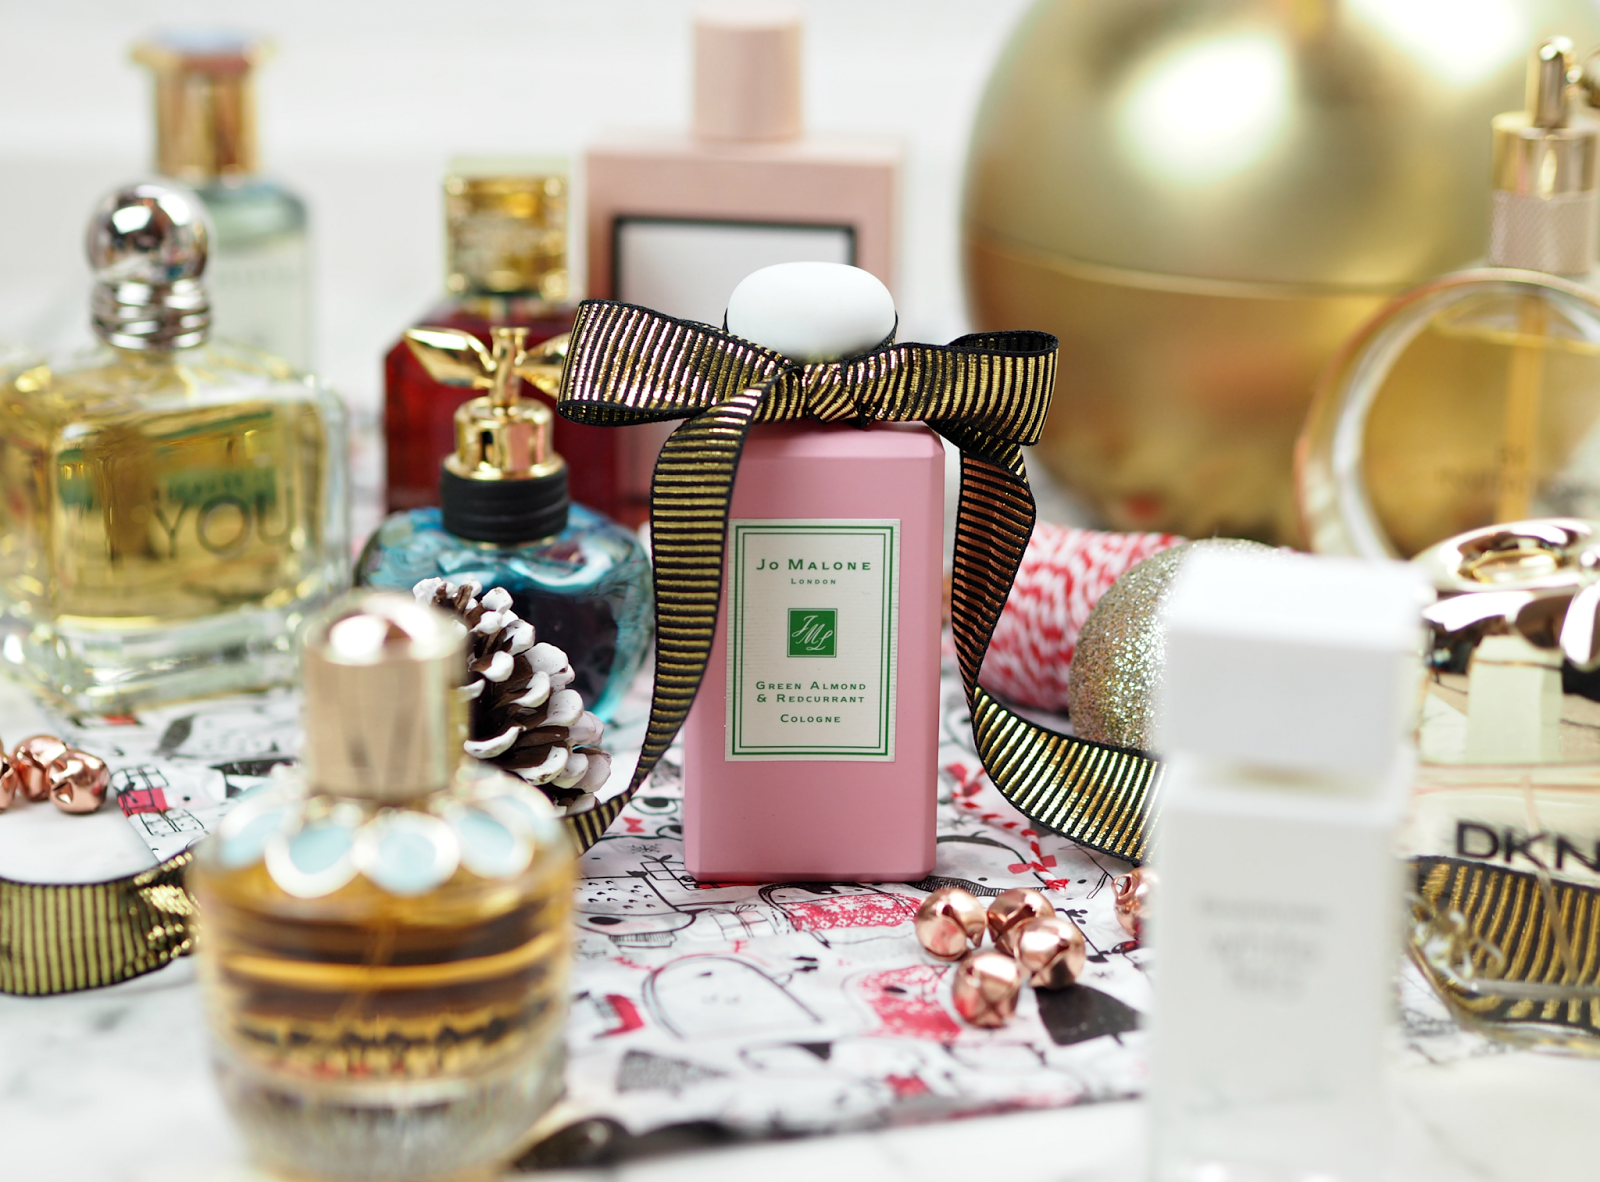 Perfect 'Loved By Everyone' Last Minute Fragrances If You're In A Panic About What To Buy